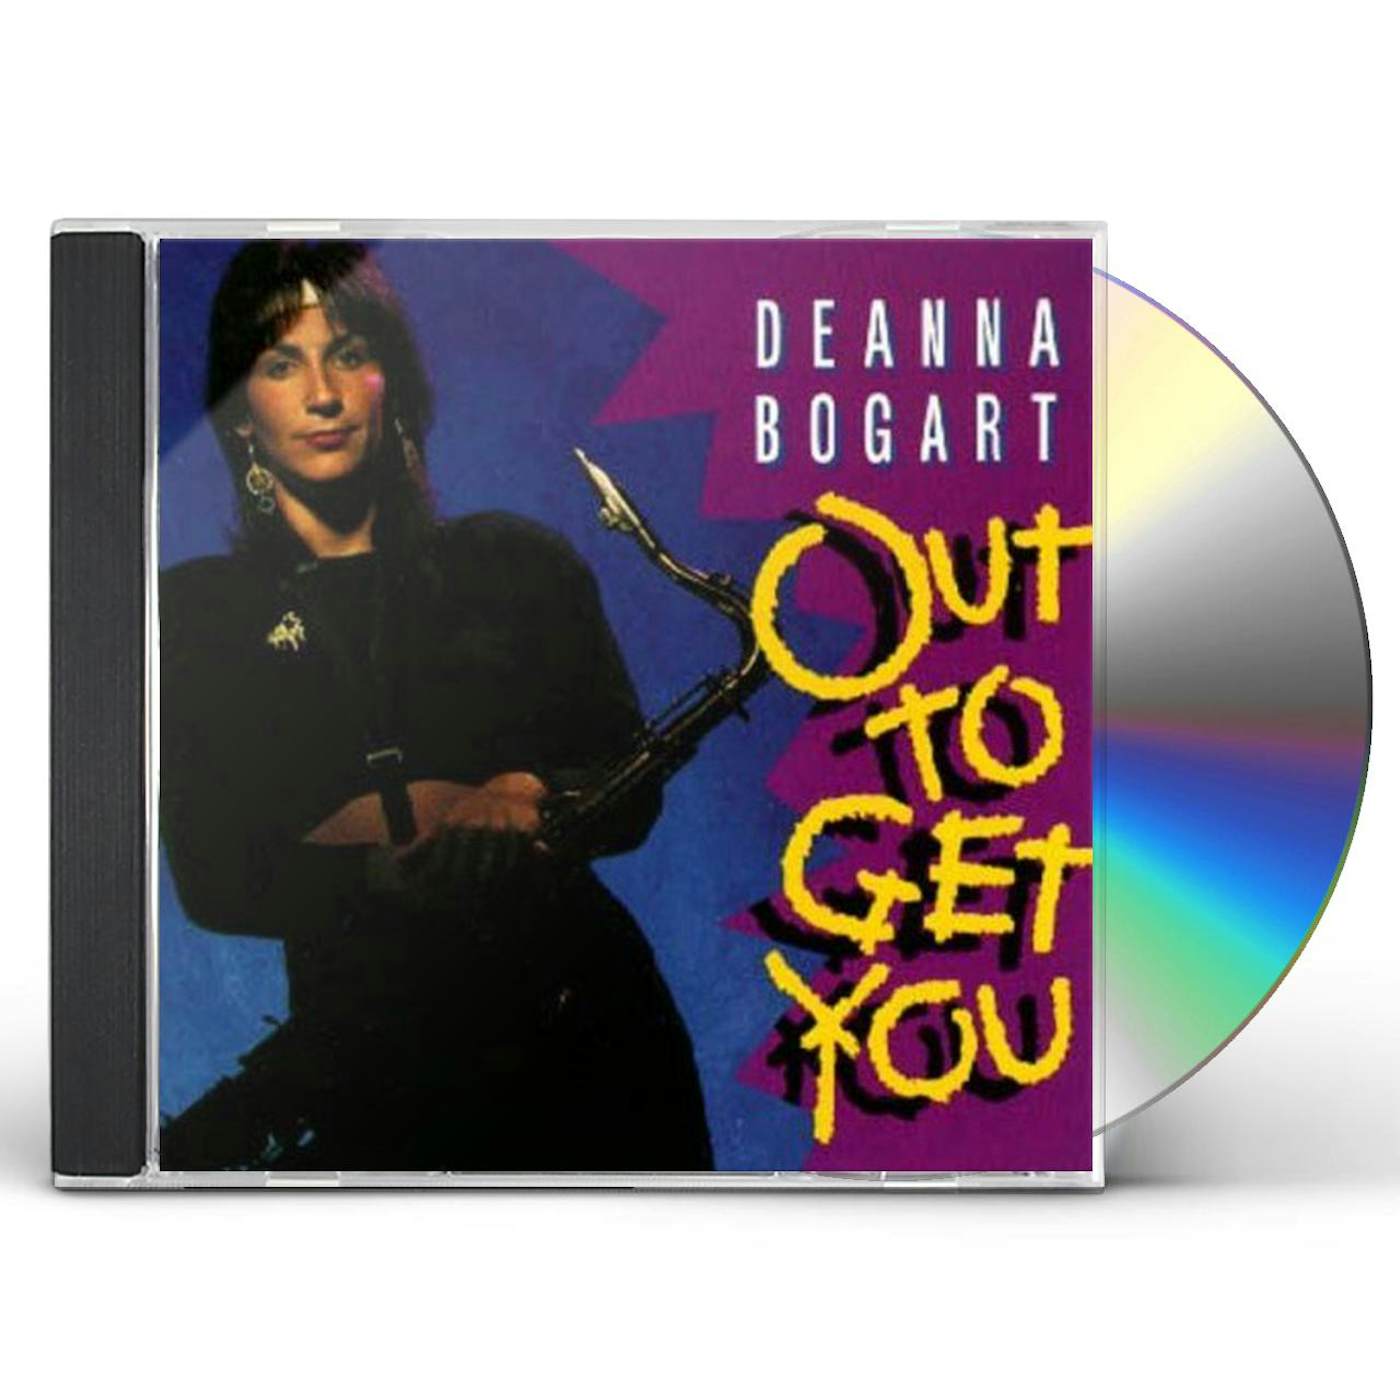 Deanna Bogart OUT TO GET YOU CD